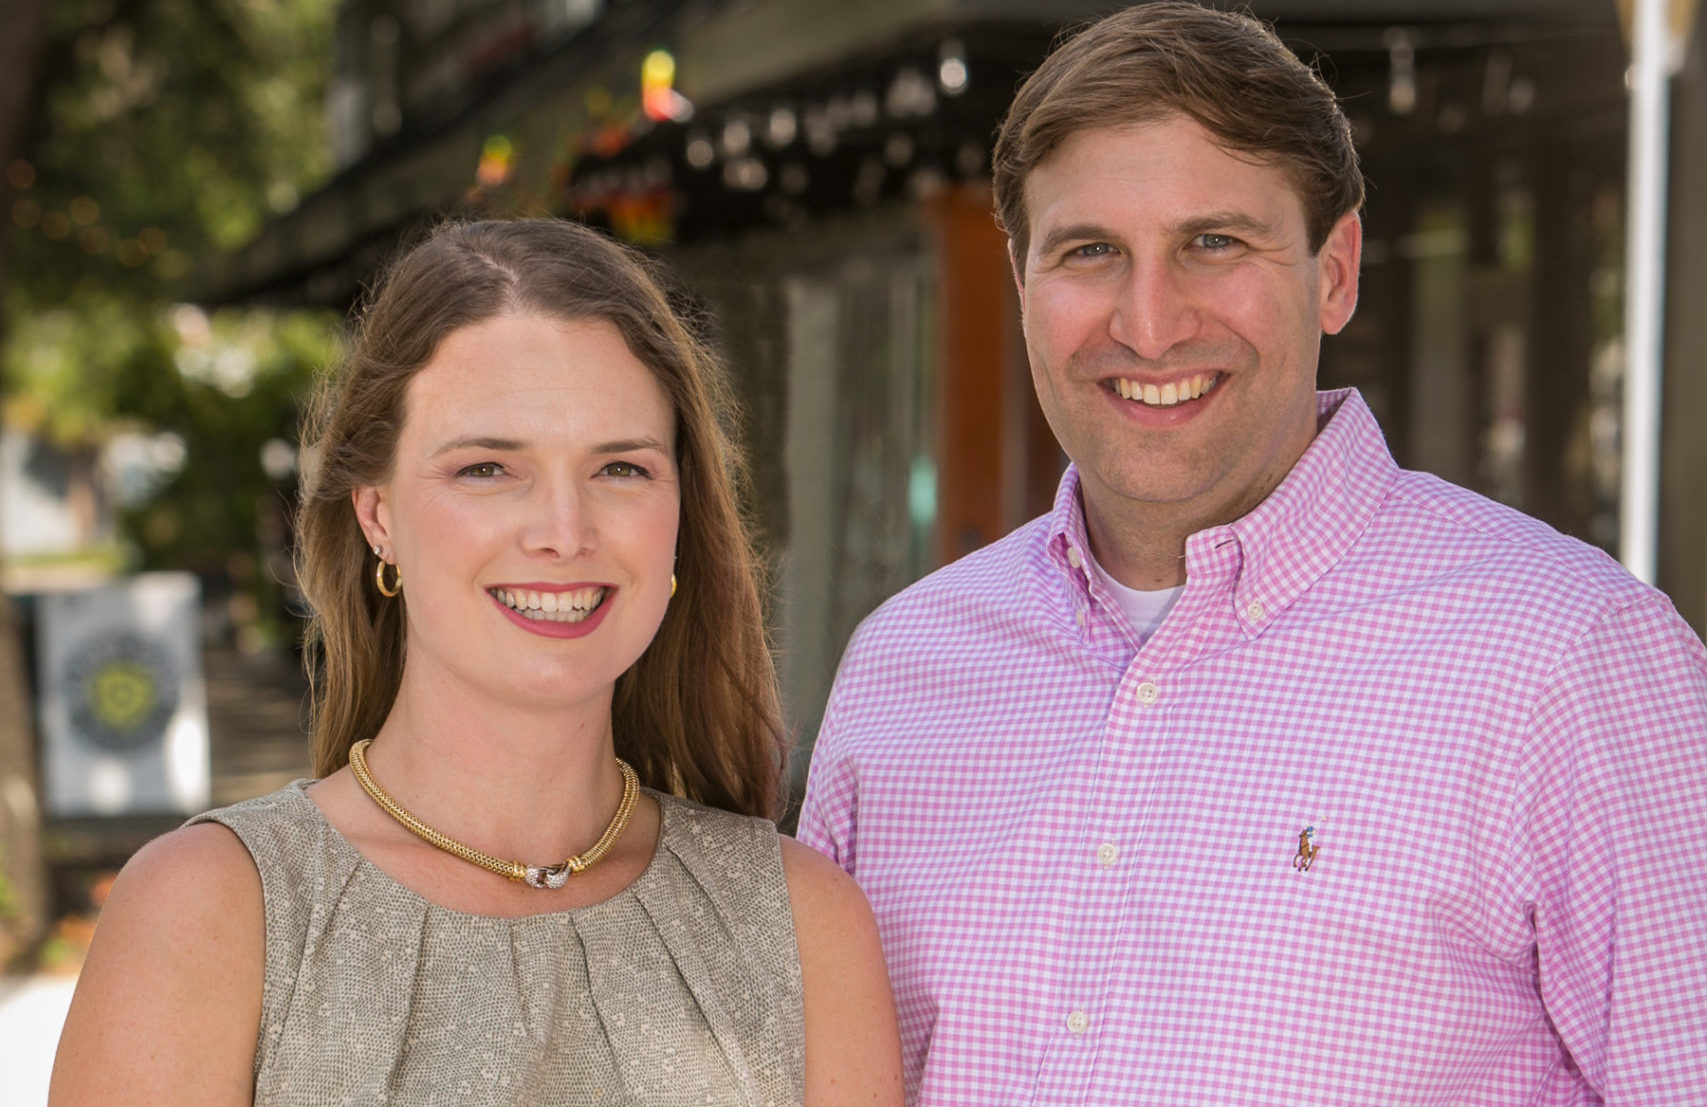 Above: Kristen and Mark Engelen, co-founders of the St. Pete-based Rx Live.